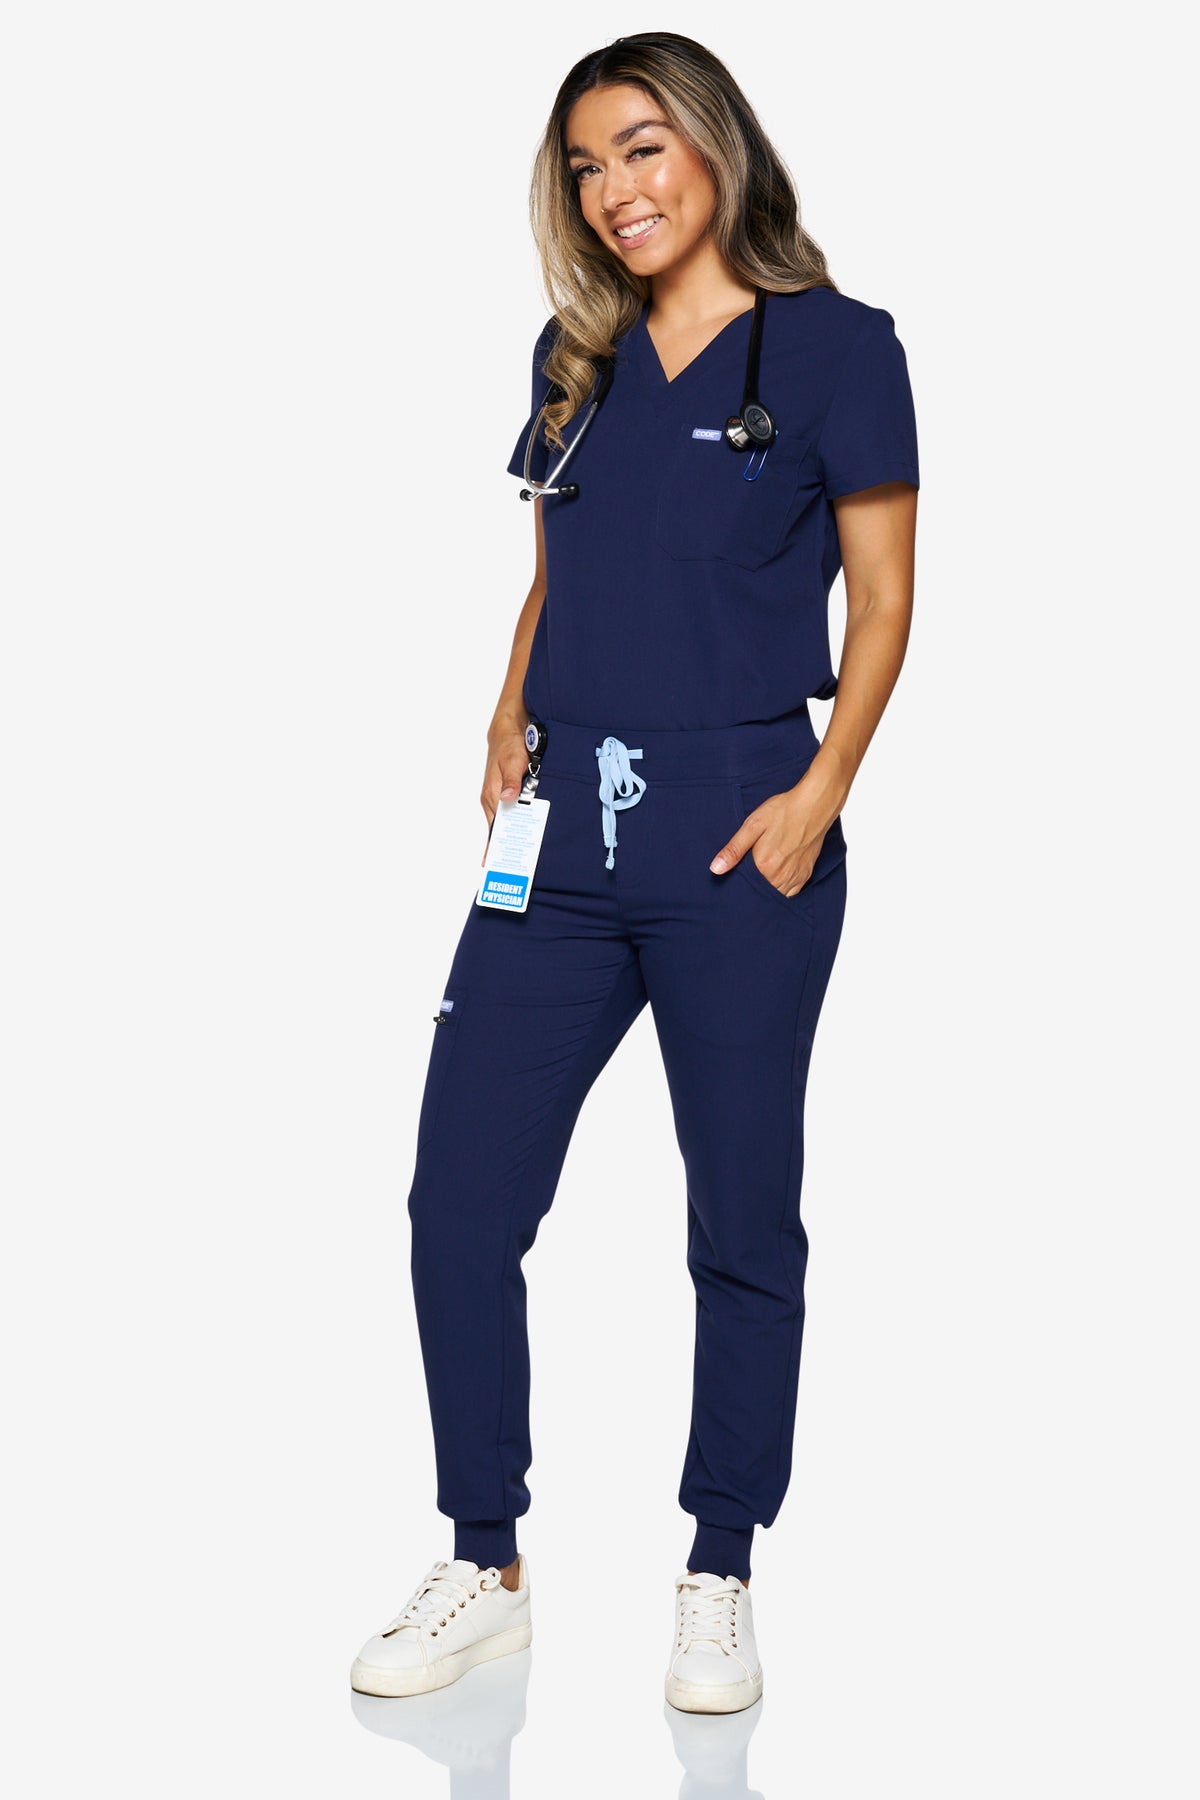 Navy Fit Scrub Joggers  Shock Collection – CODE NXT Scrubs